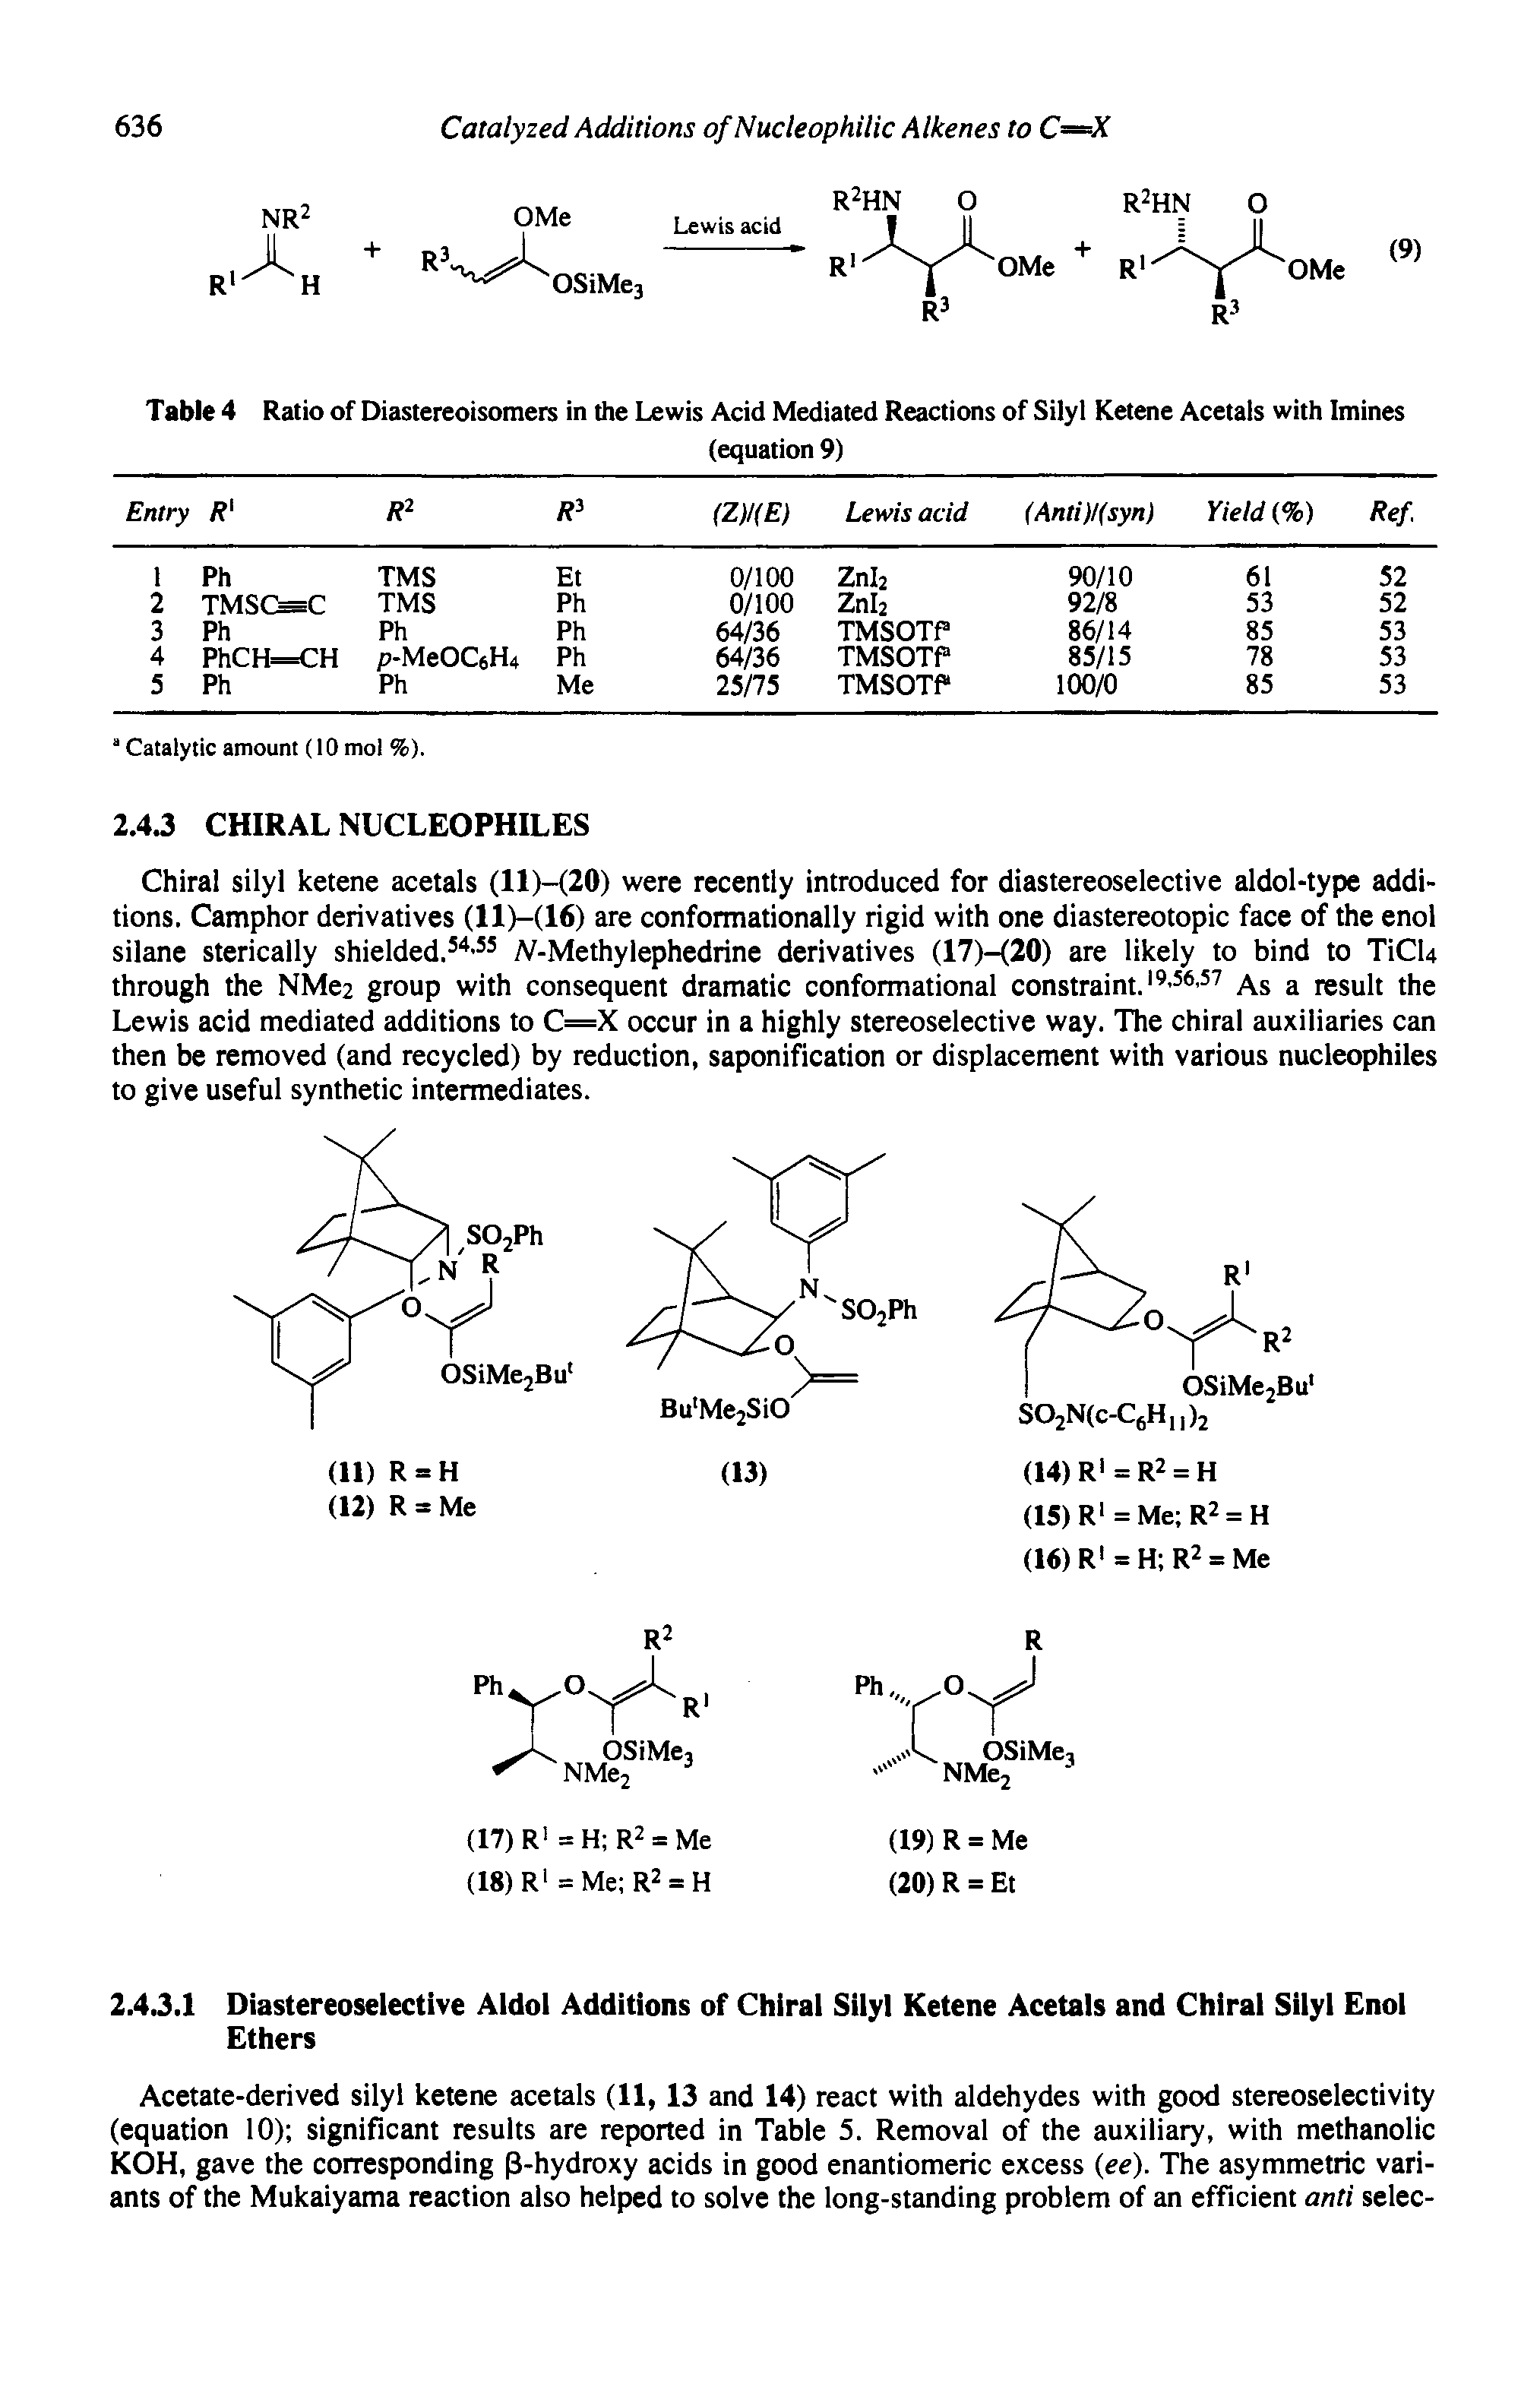 Table 4 Ratio of Diastereoisomers in the Lewis Acid Mediated Reactions of Silyl Ketene Acetals with Imines...